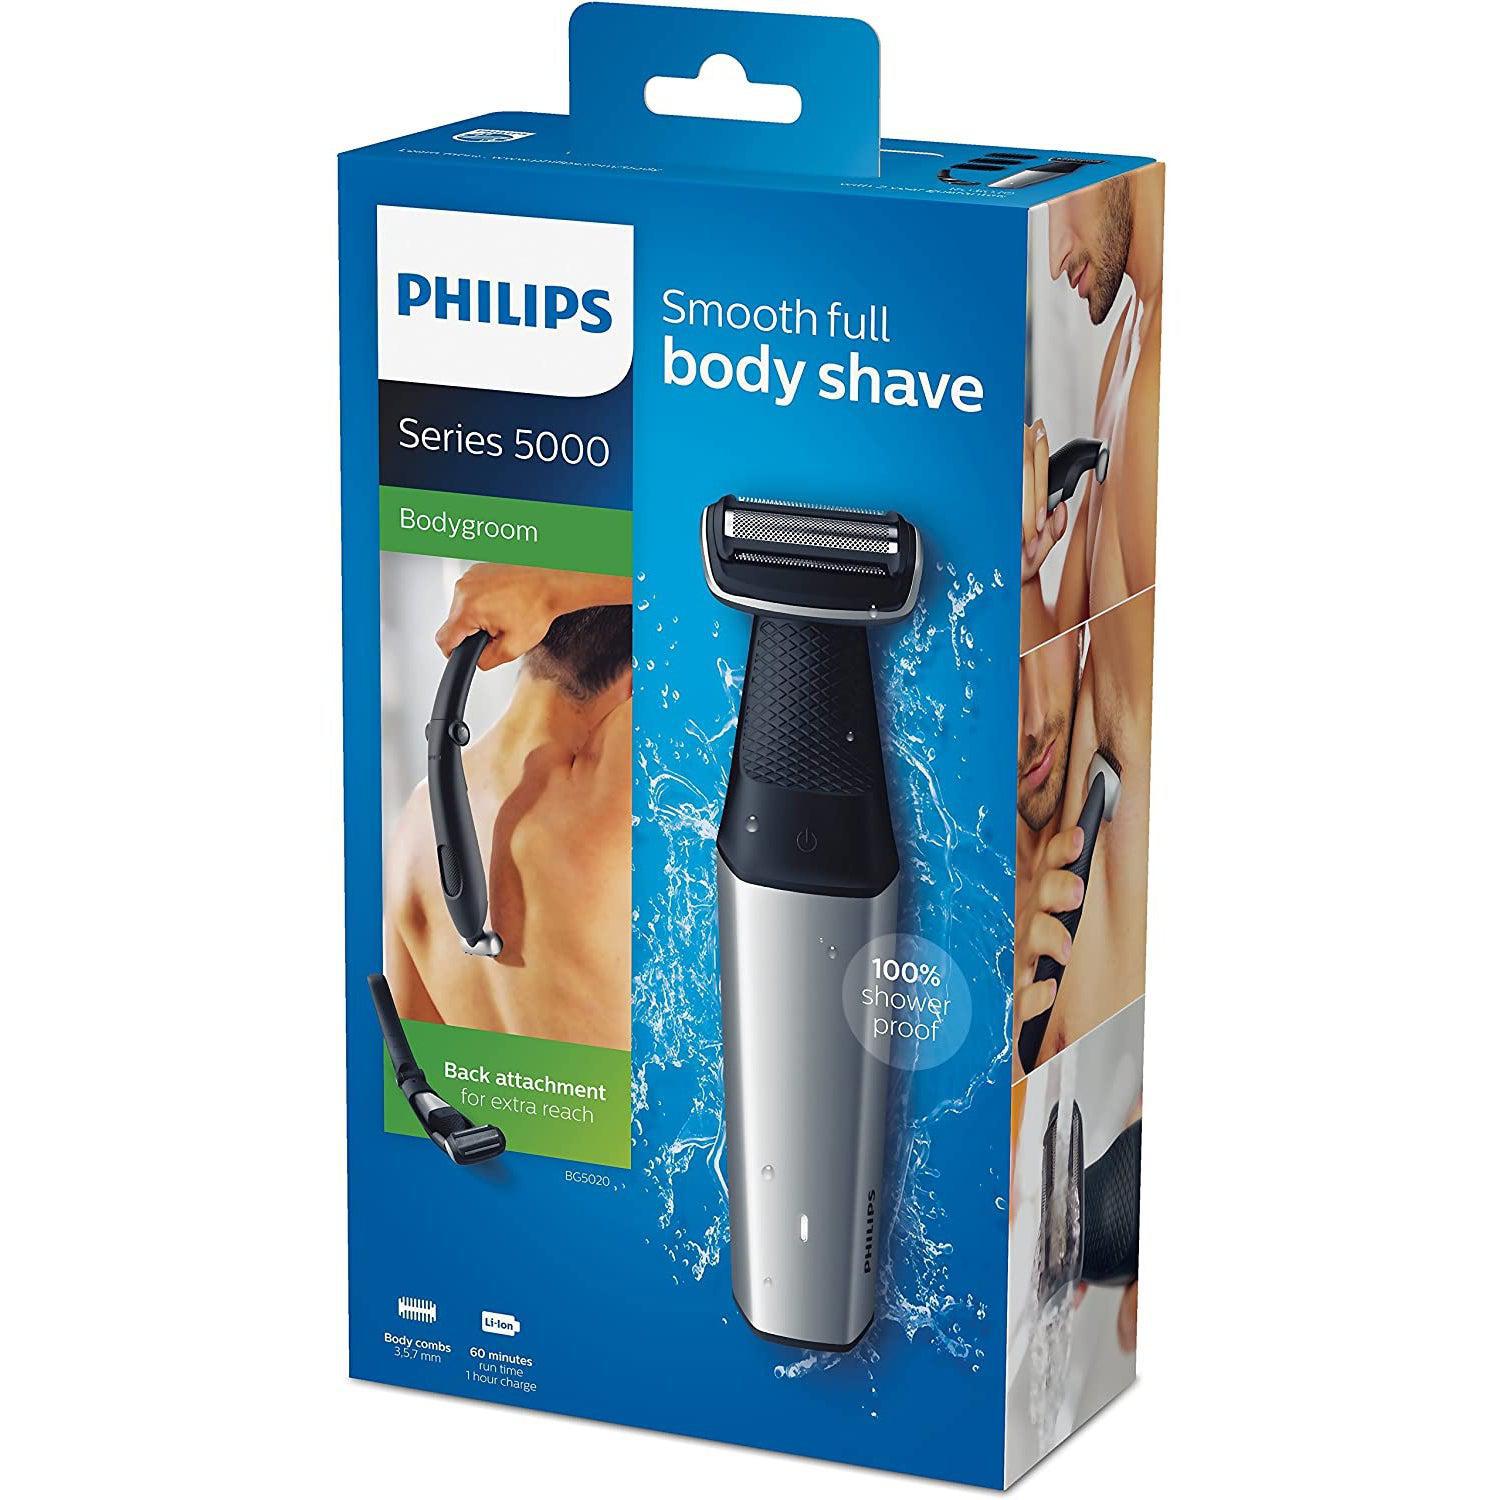 Philips BG5020/15 Bodygroom Series 5000 with Back Hair Removal Attachment and 3 Comb Attachments for Trimming - Healthxpress.ie